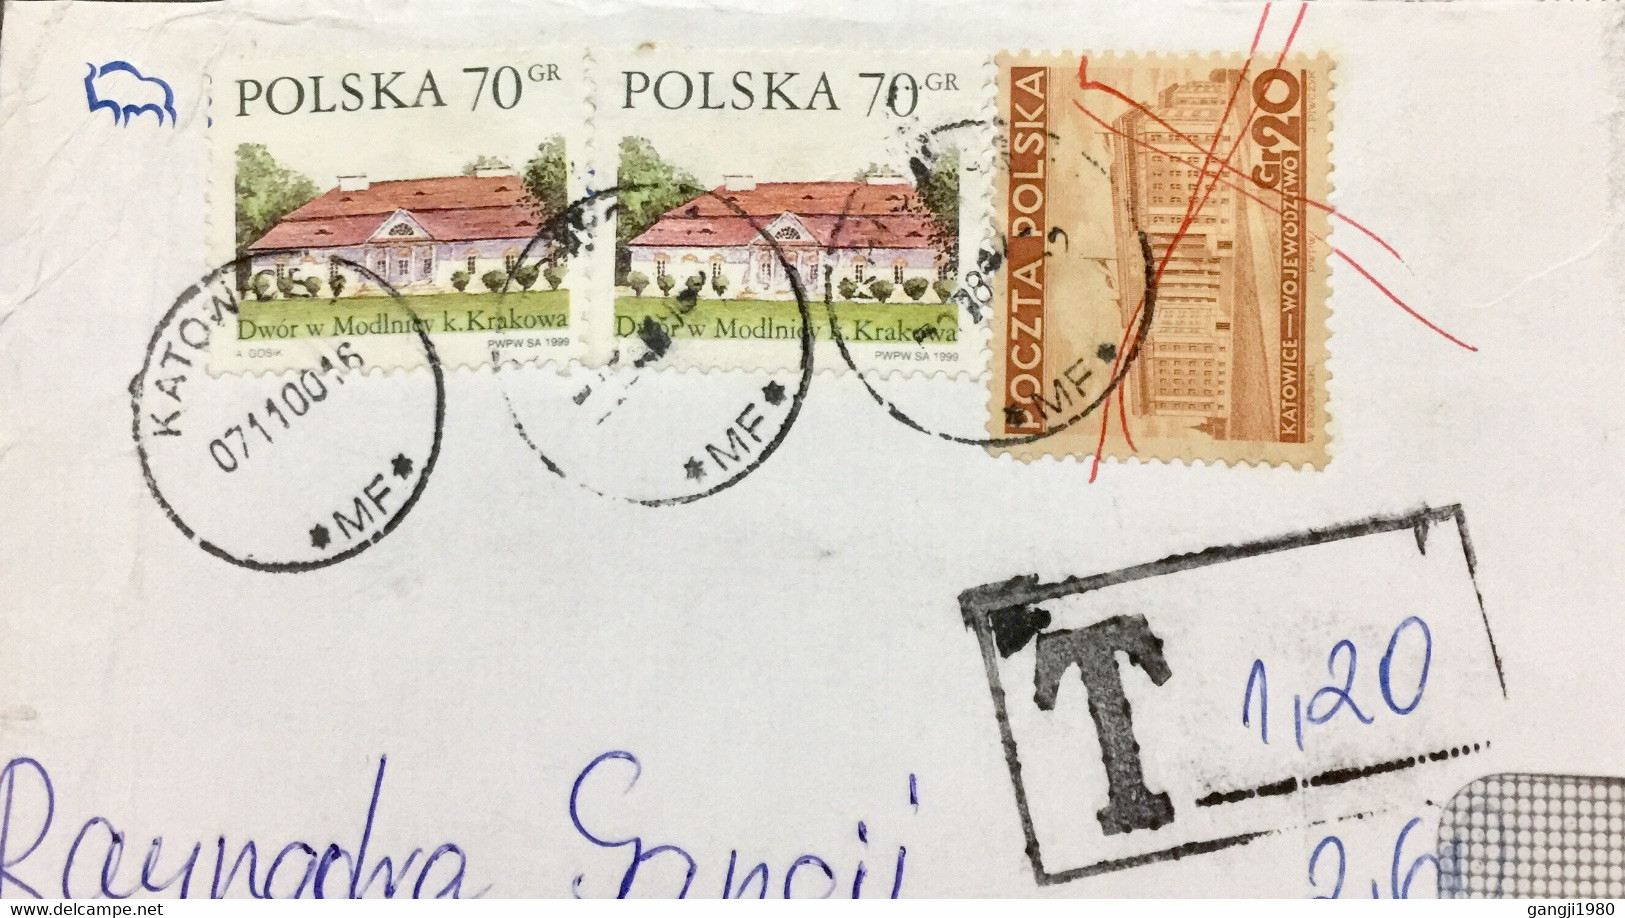 POLAND 2000, REUSED COVER 1935, BUILDING STAMP USED NOT ACCEPTED SO DUE ,”T” IN BOXED 3 STAMPS KATOWCE  & ŁÓDŹ CANCELLAT - Covers & Documents